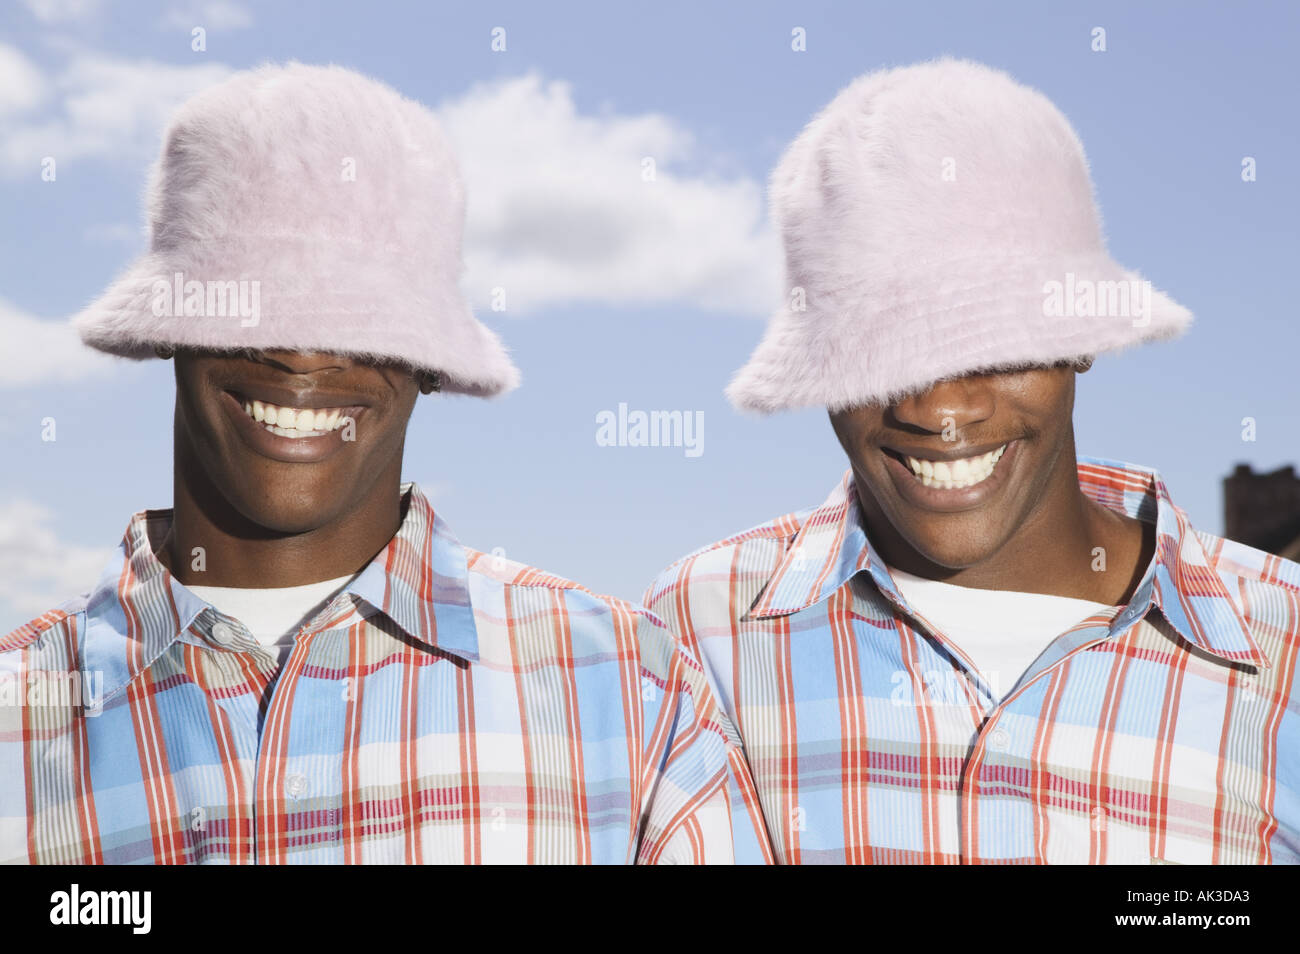 Twin teenage boys in matching hats and shirts Stock Photo